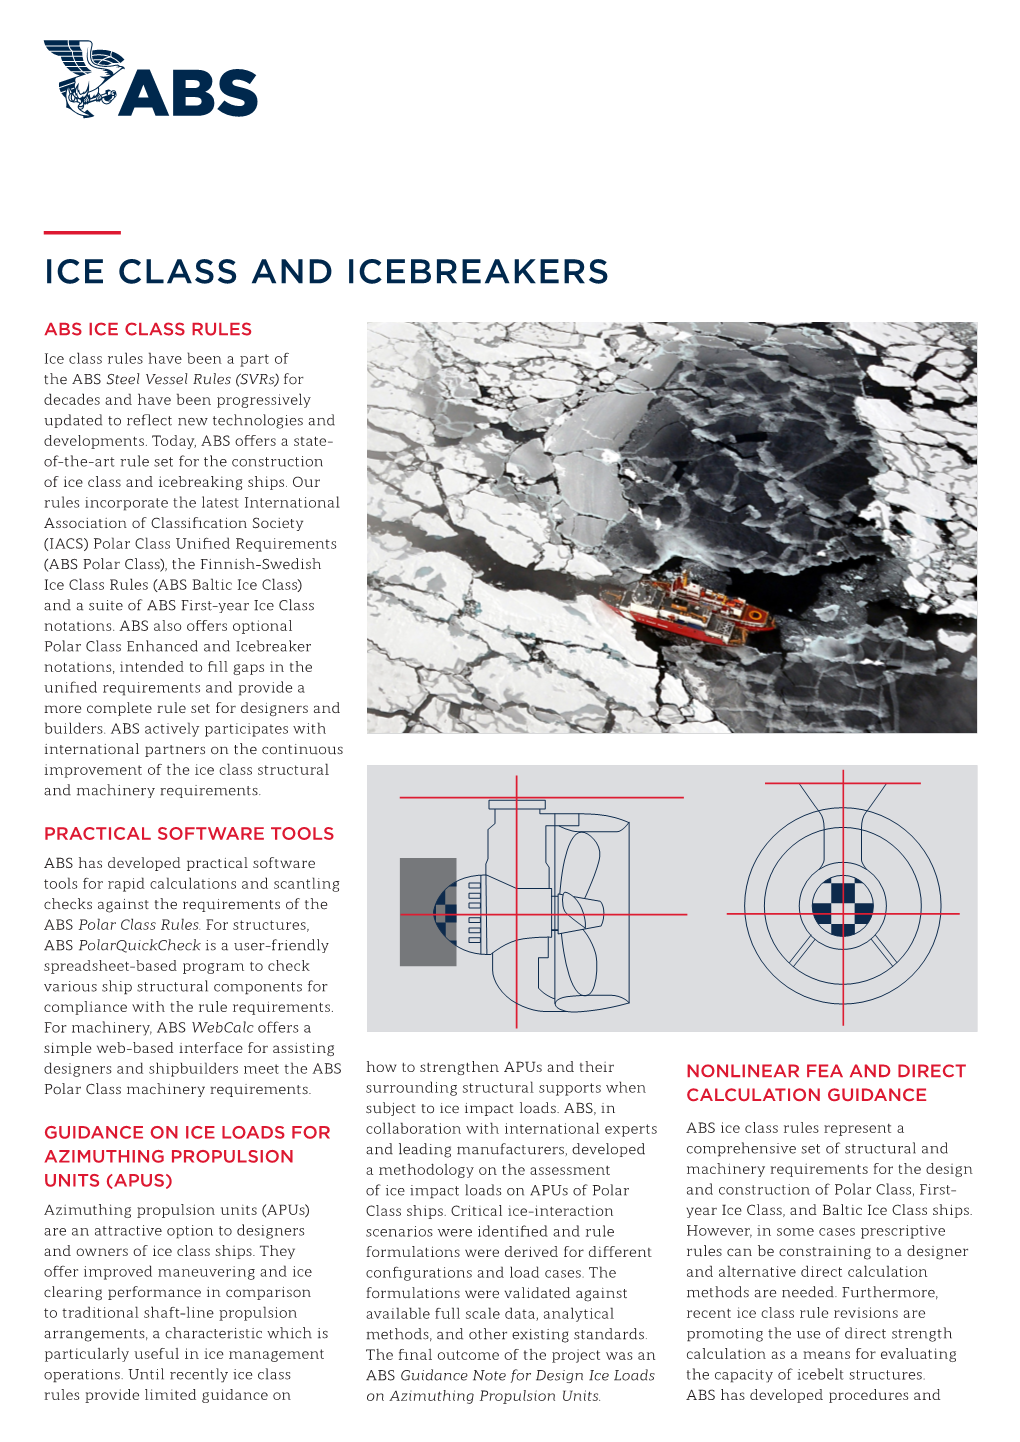 Ice Class and Icebreakers